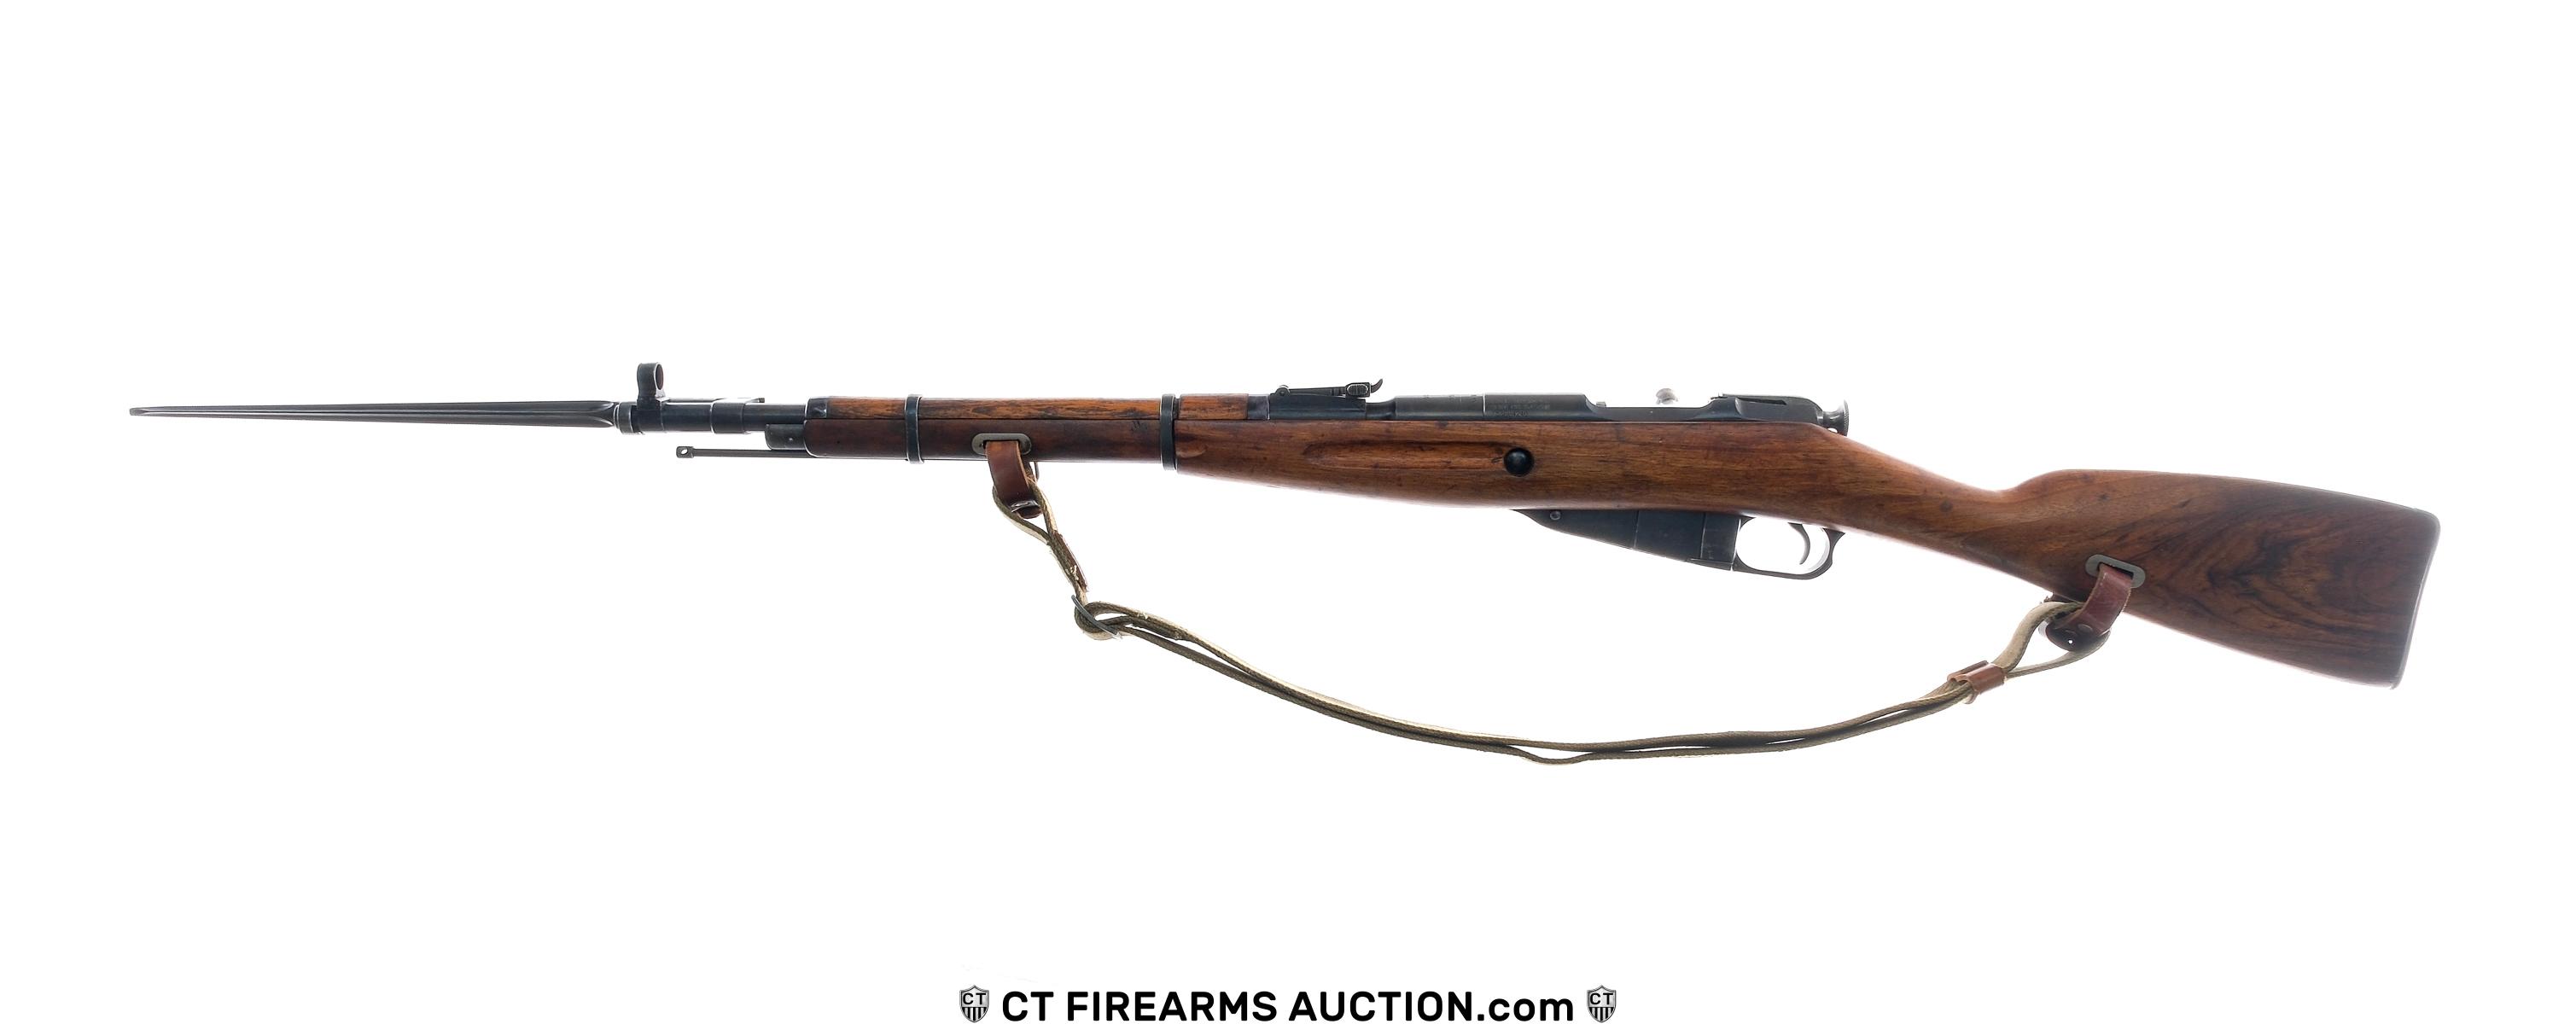 Chinese Mosin Type 53 7.62x54R Bolt Action Rifle